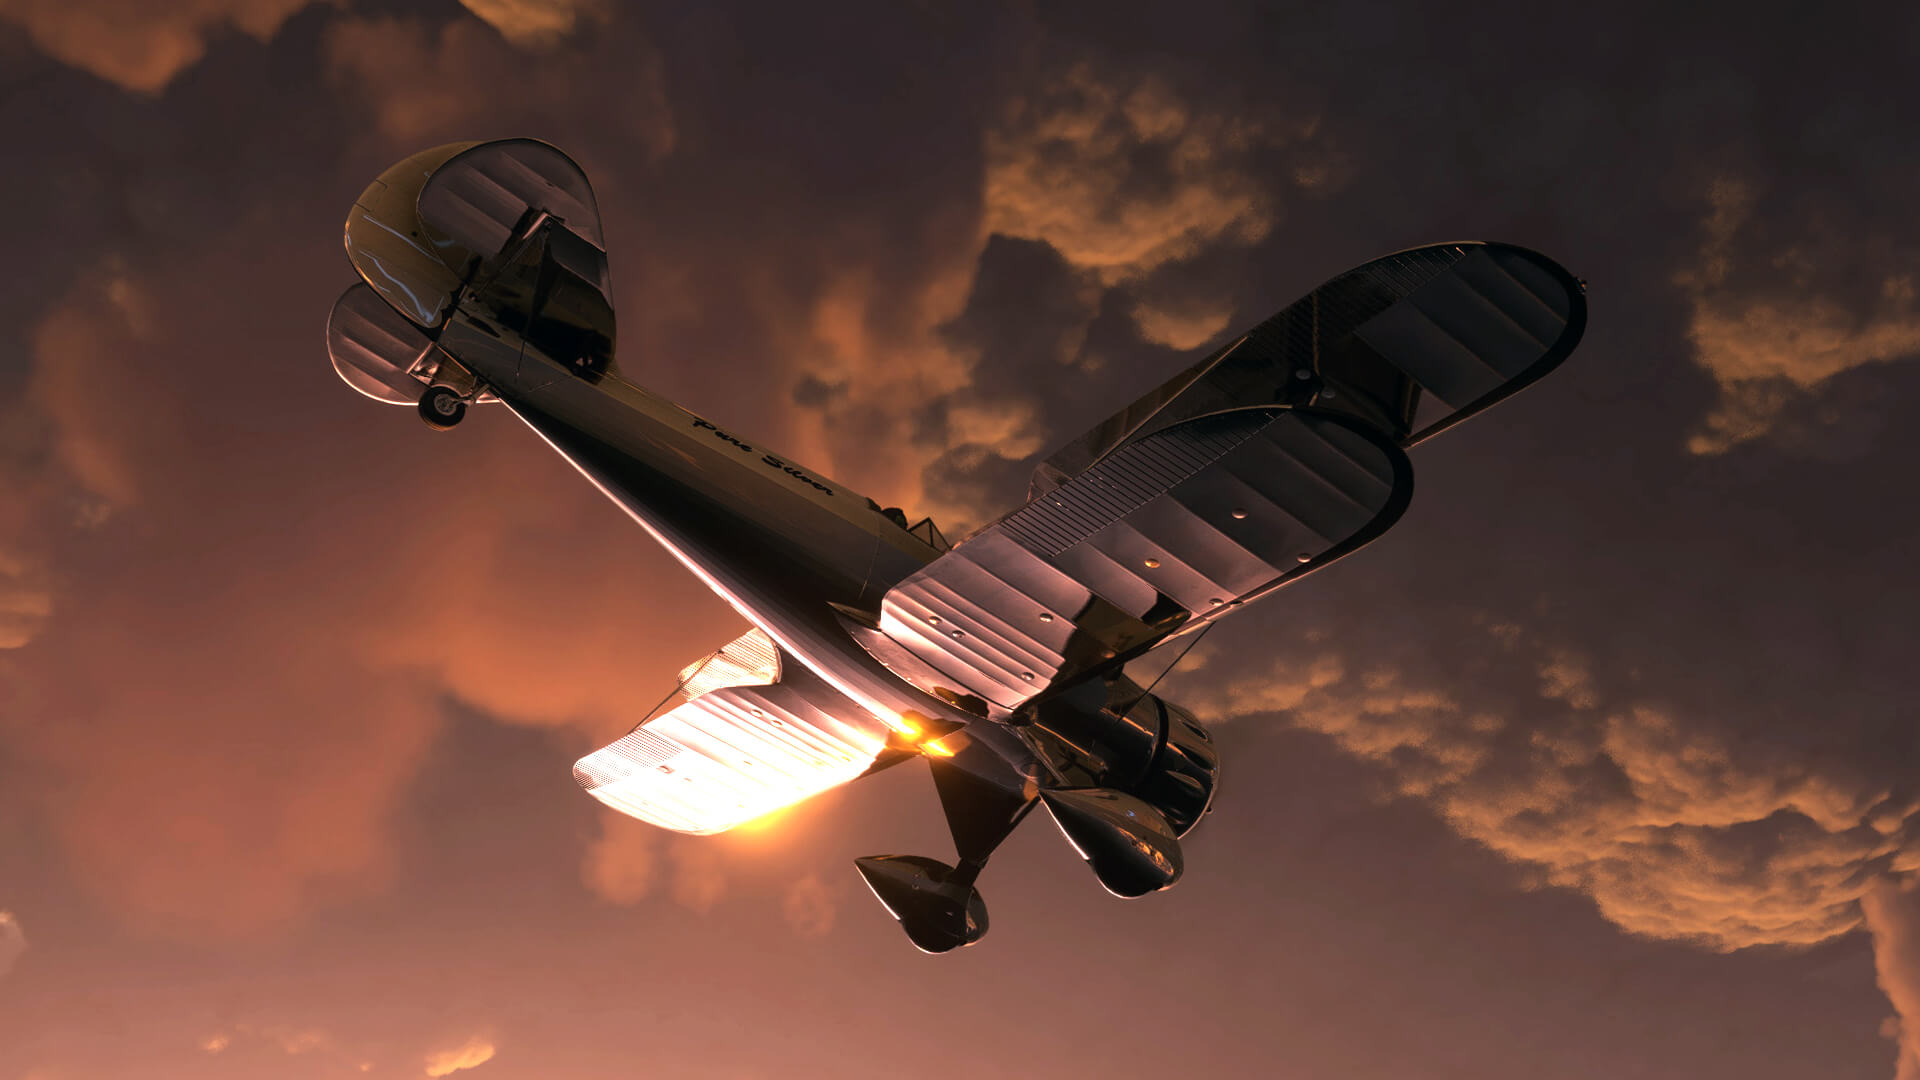 A silver bi-plane has the sun reflecting off of the lower side of its left wing and fuselage, as it flies below orange and grey overcast clouds.